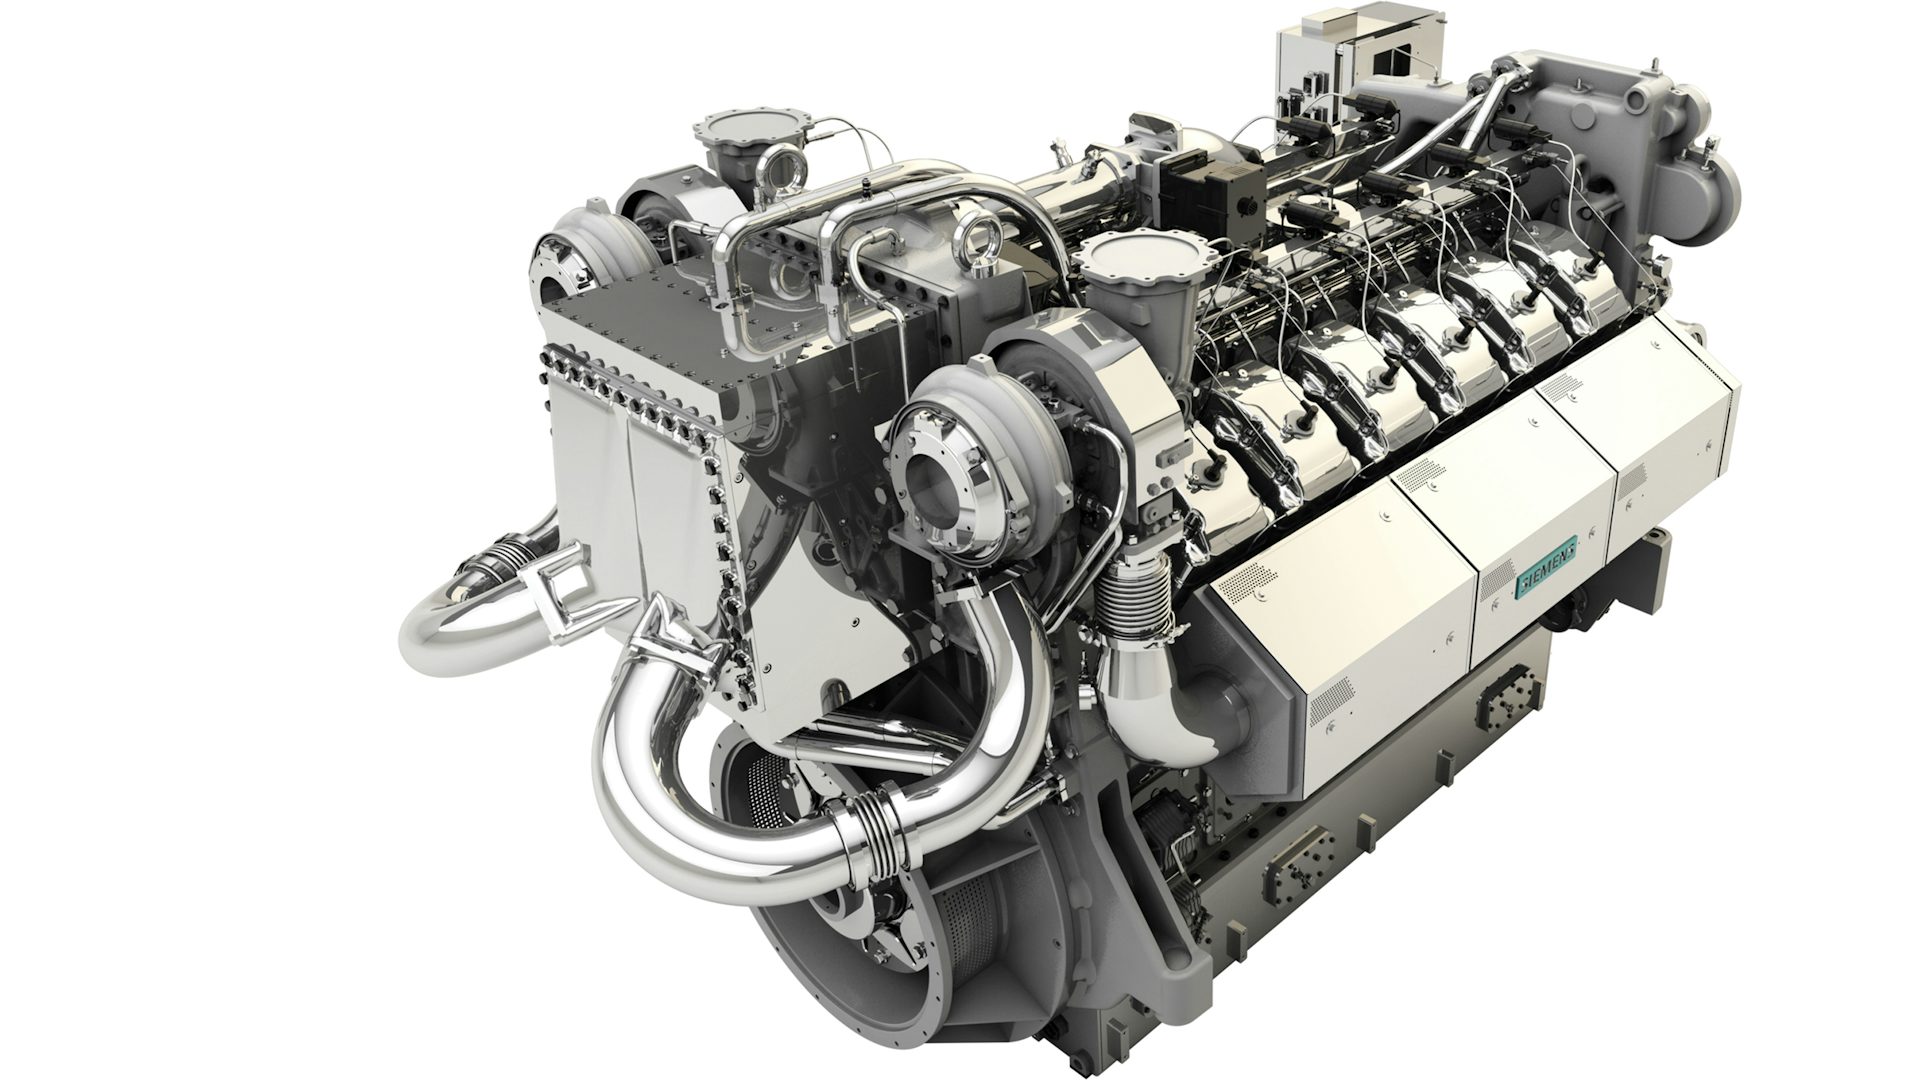 A complex engine modeled in a Computer-Aided Design system using a 3D geometric modeling kernel.